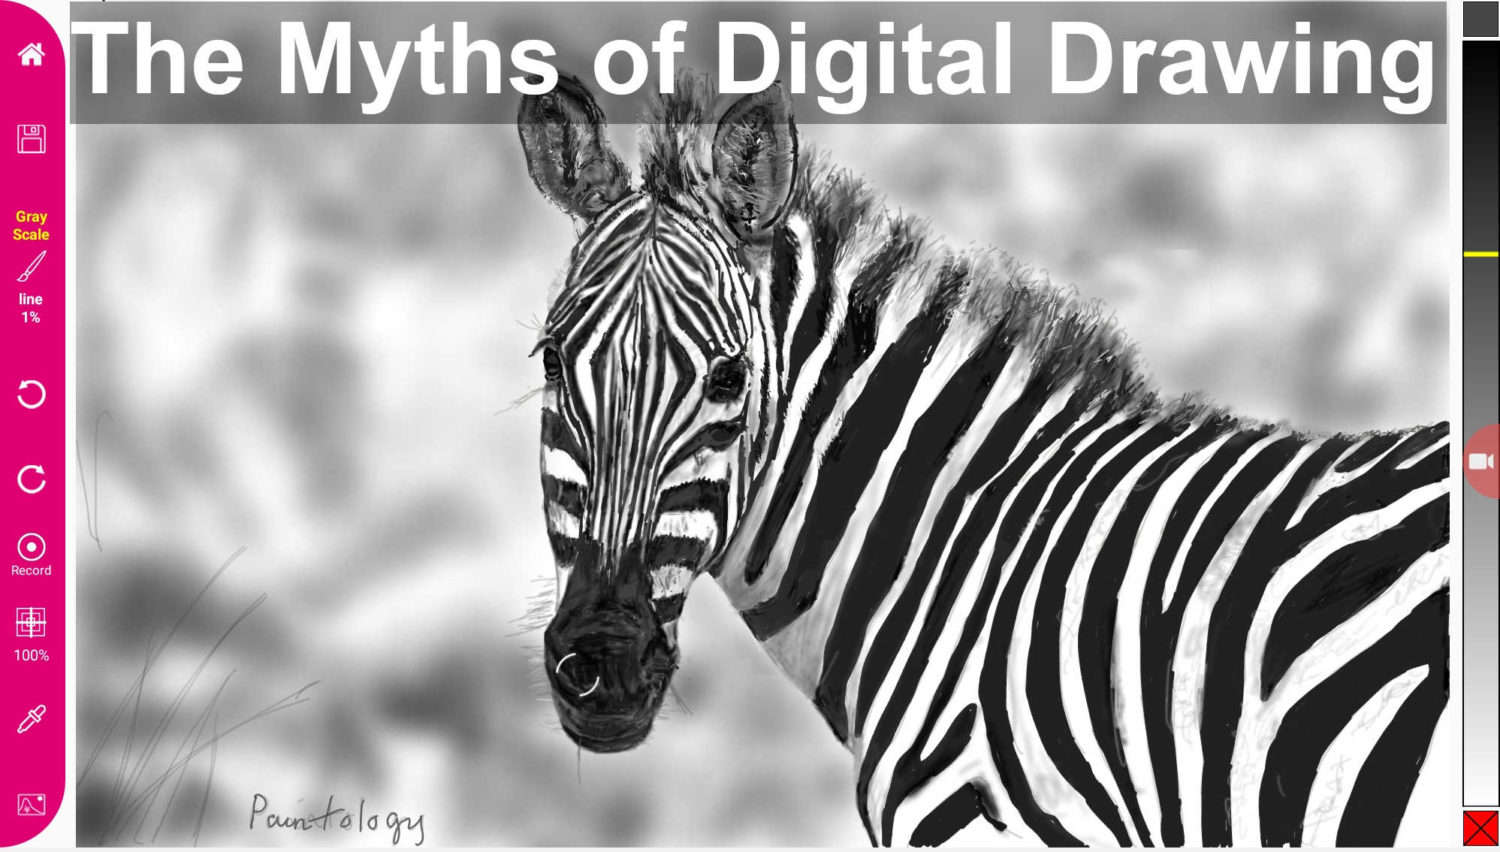 featured - myths of digital drawing